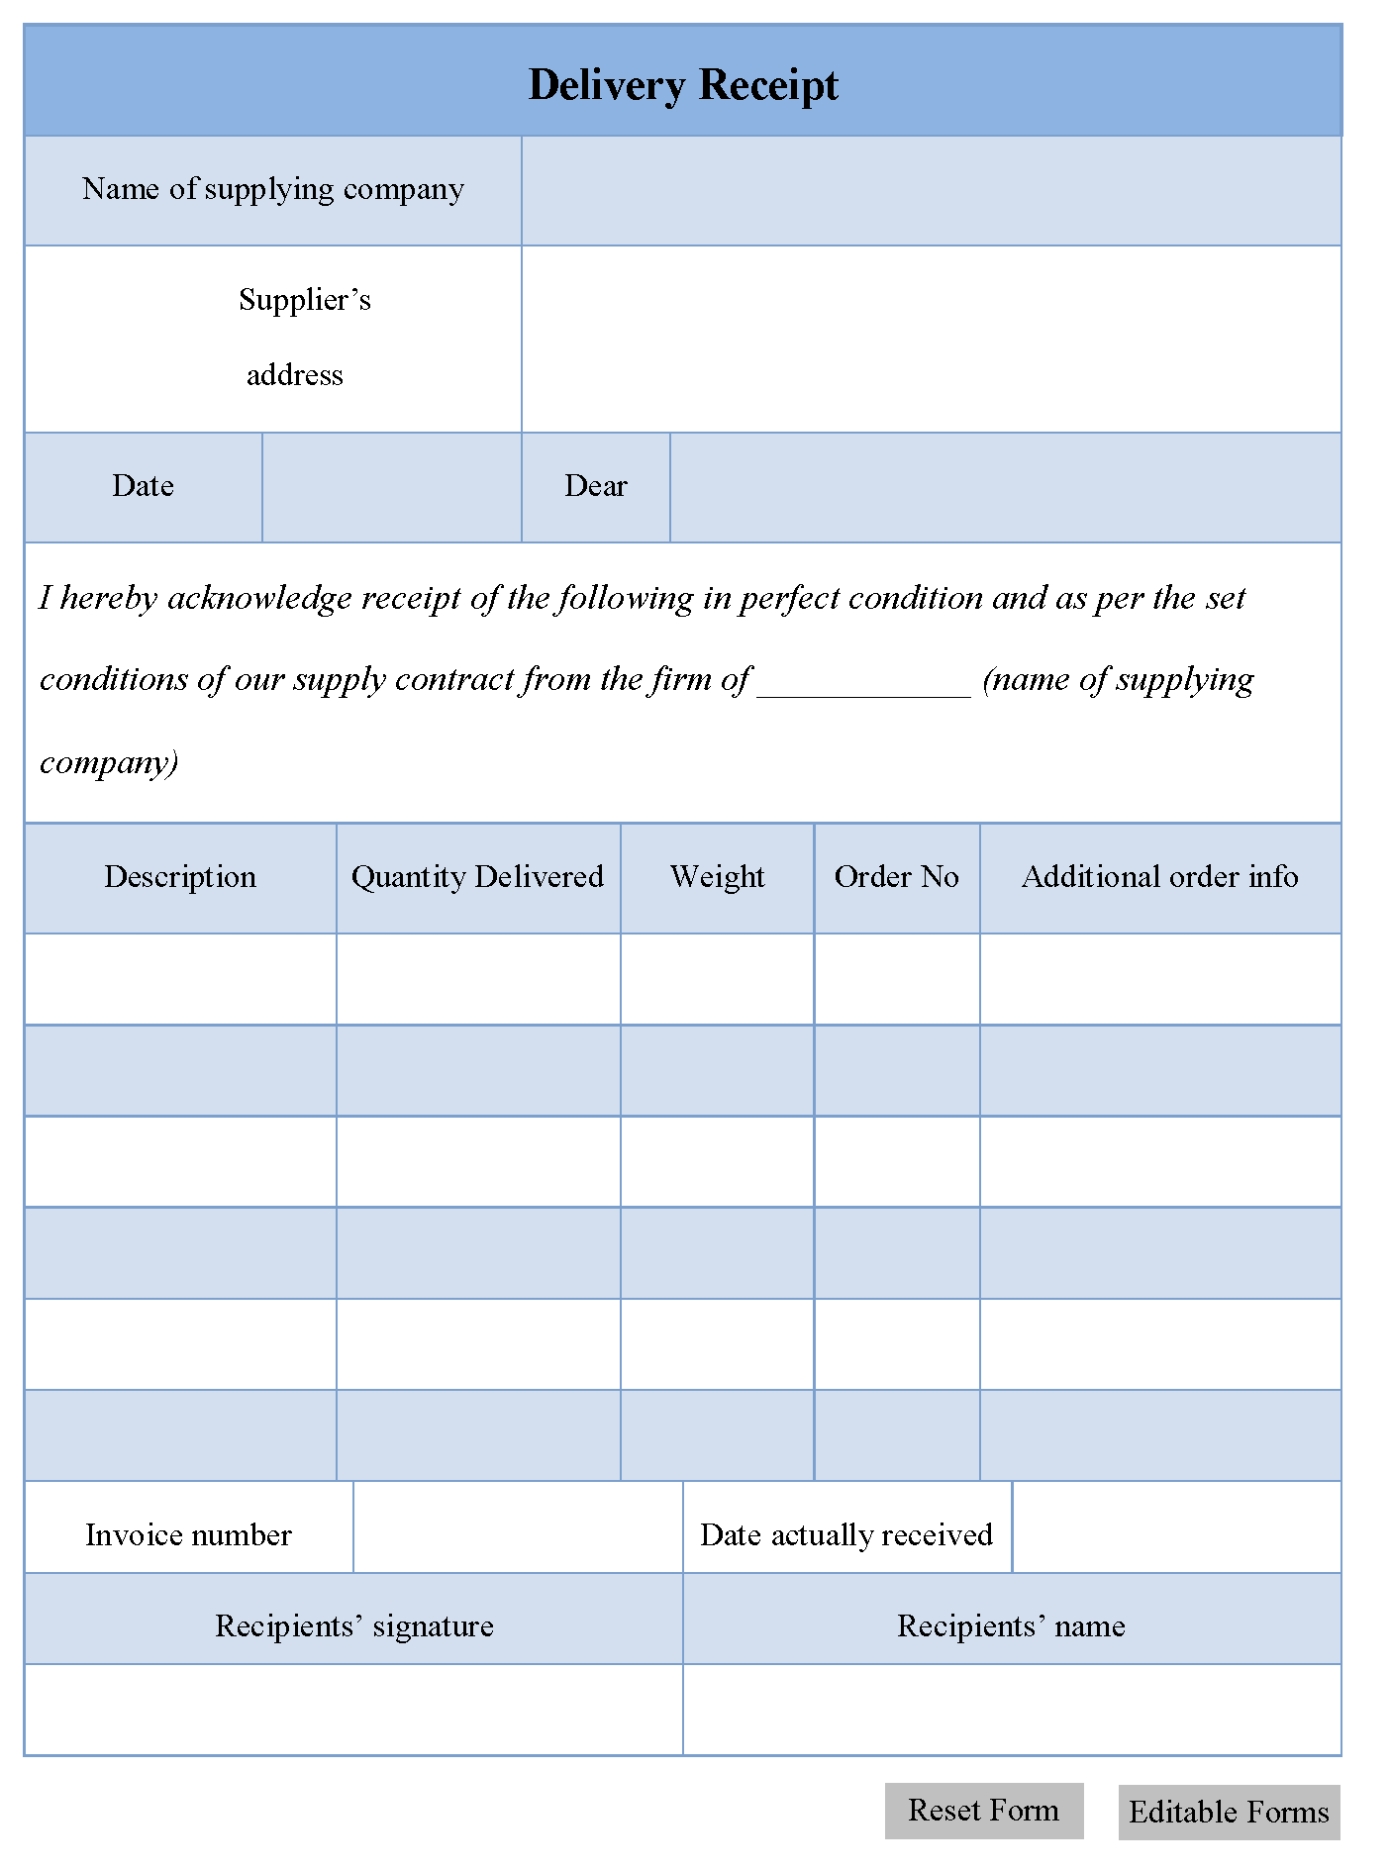 Delivery Receipt Form - Editable Forms With Proof Of Delivery Template Word